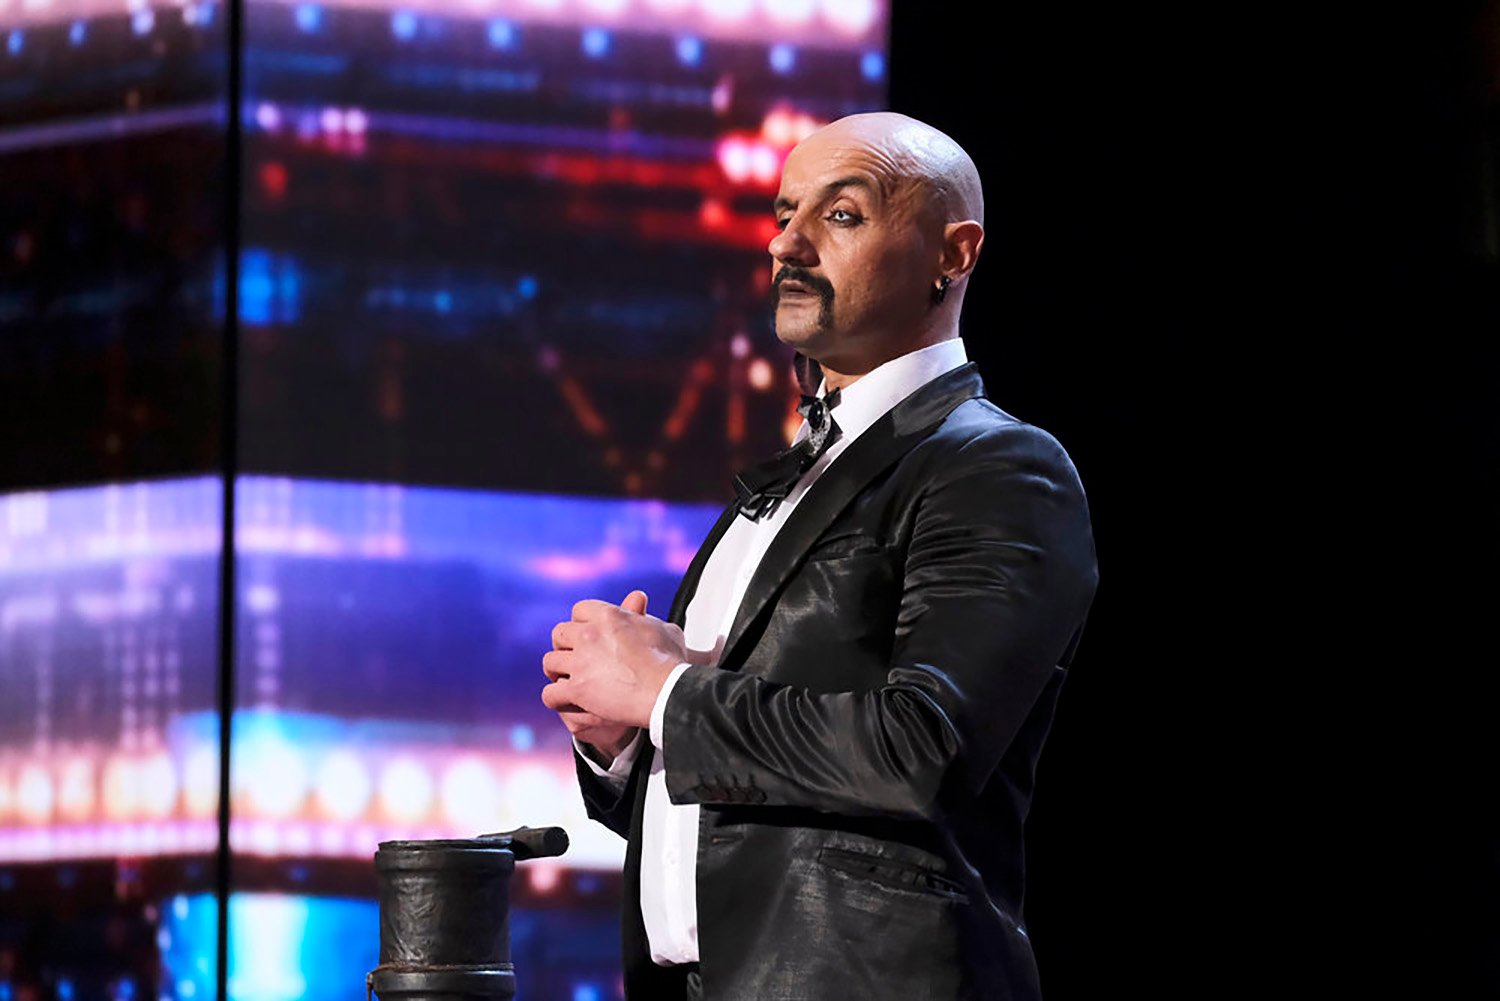 Americas Got Talent act Zeno Sputafuoco, whose performance included shoving a hook up his nose and pulling a cart.